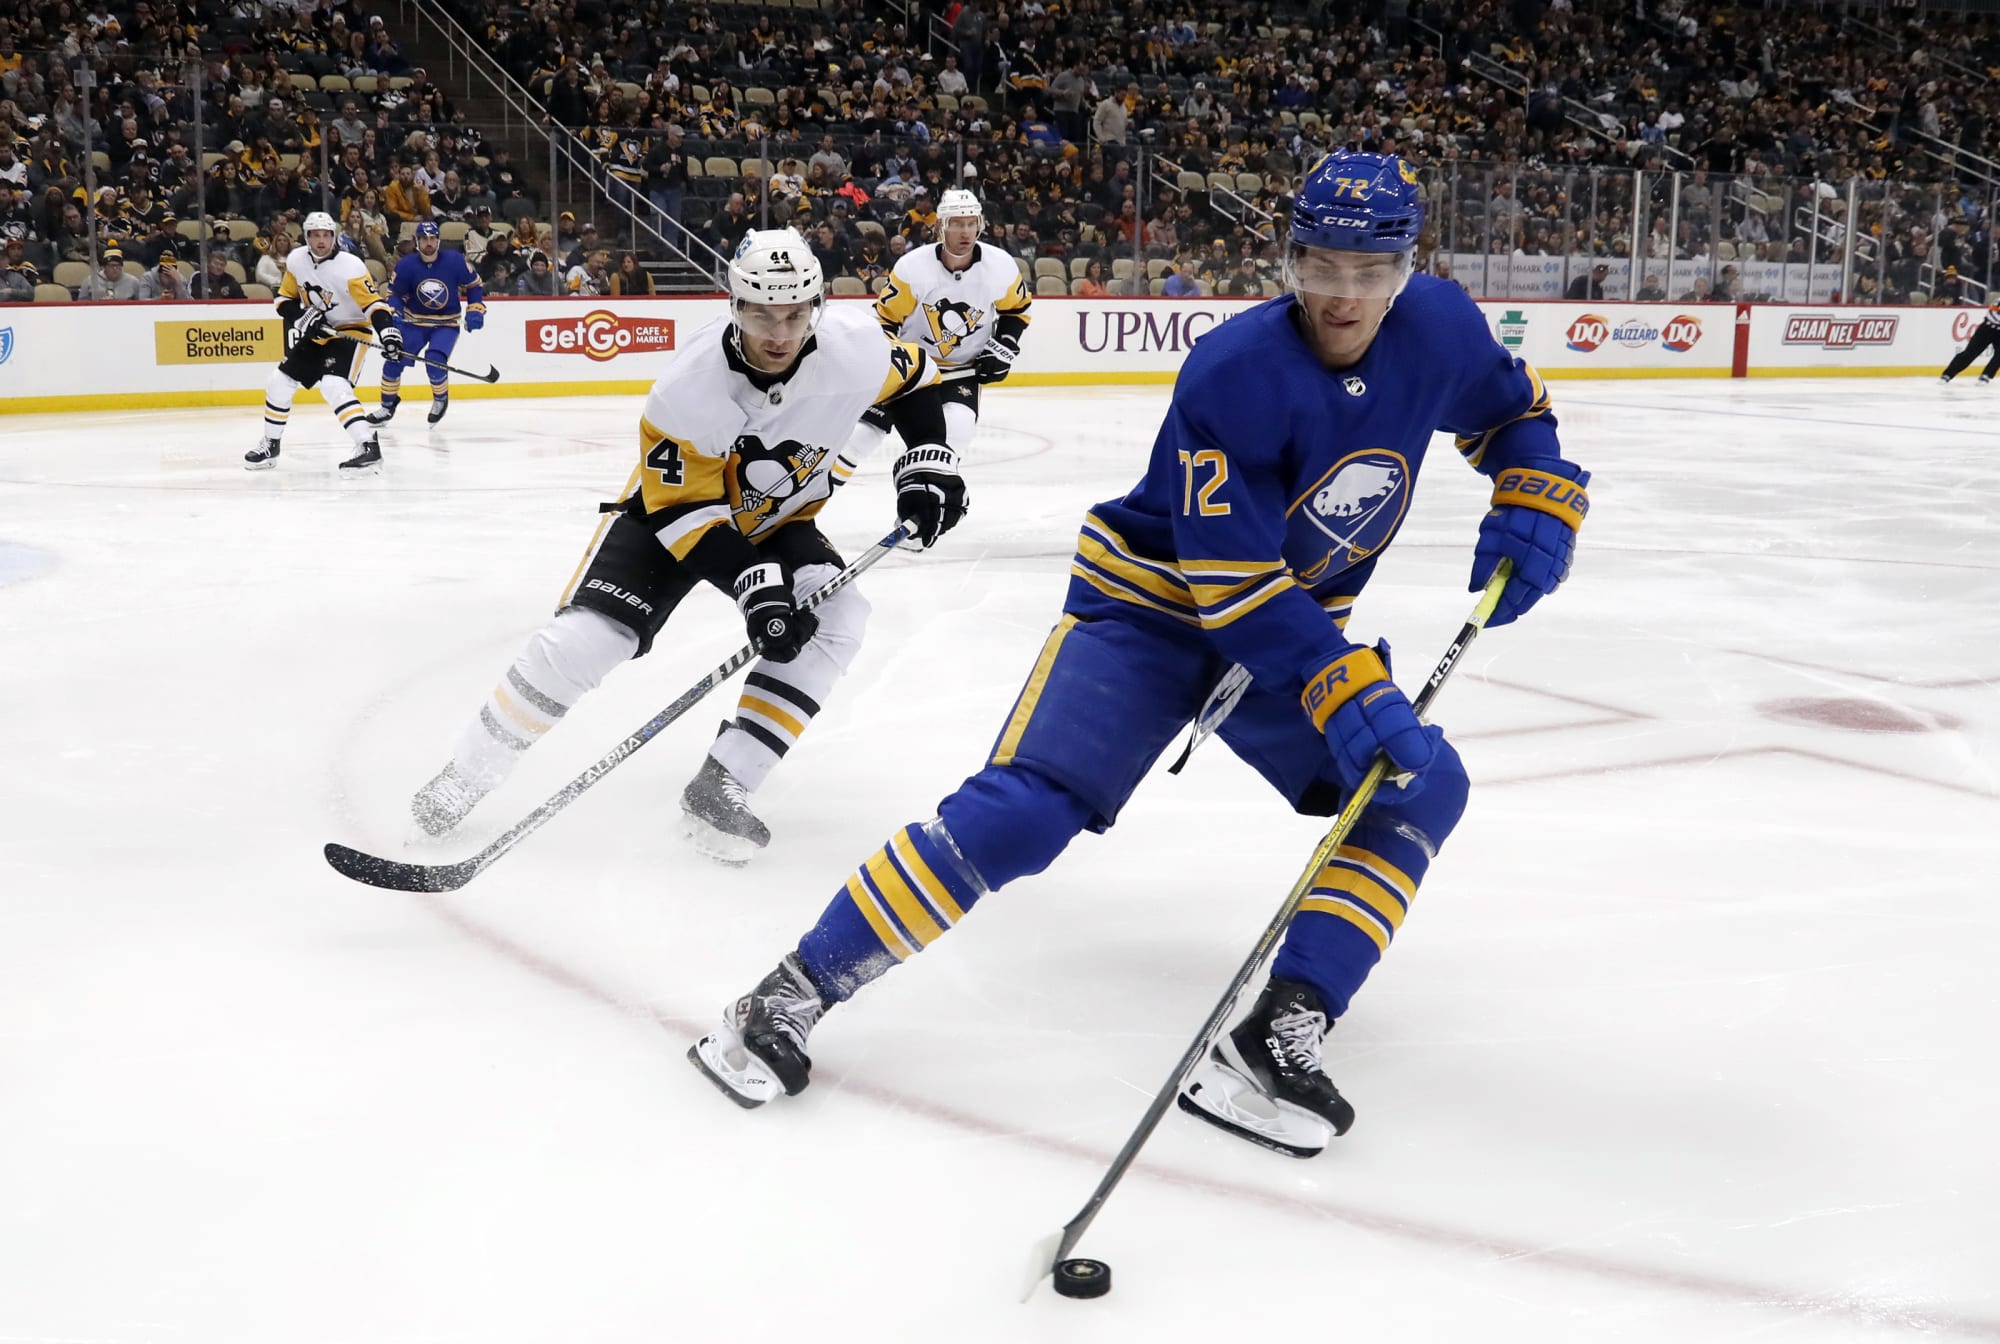 Sabres notebook: Tage Thompson named NHL's second star of the week